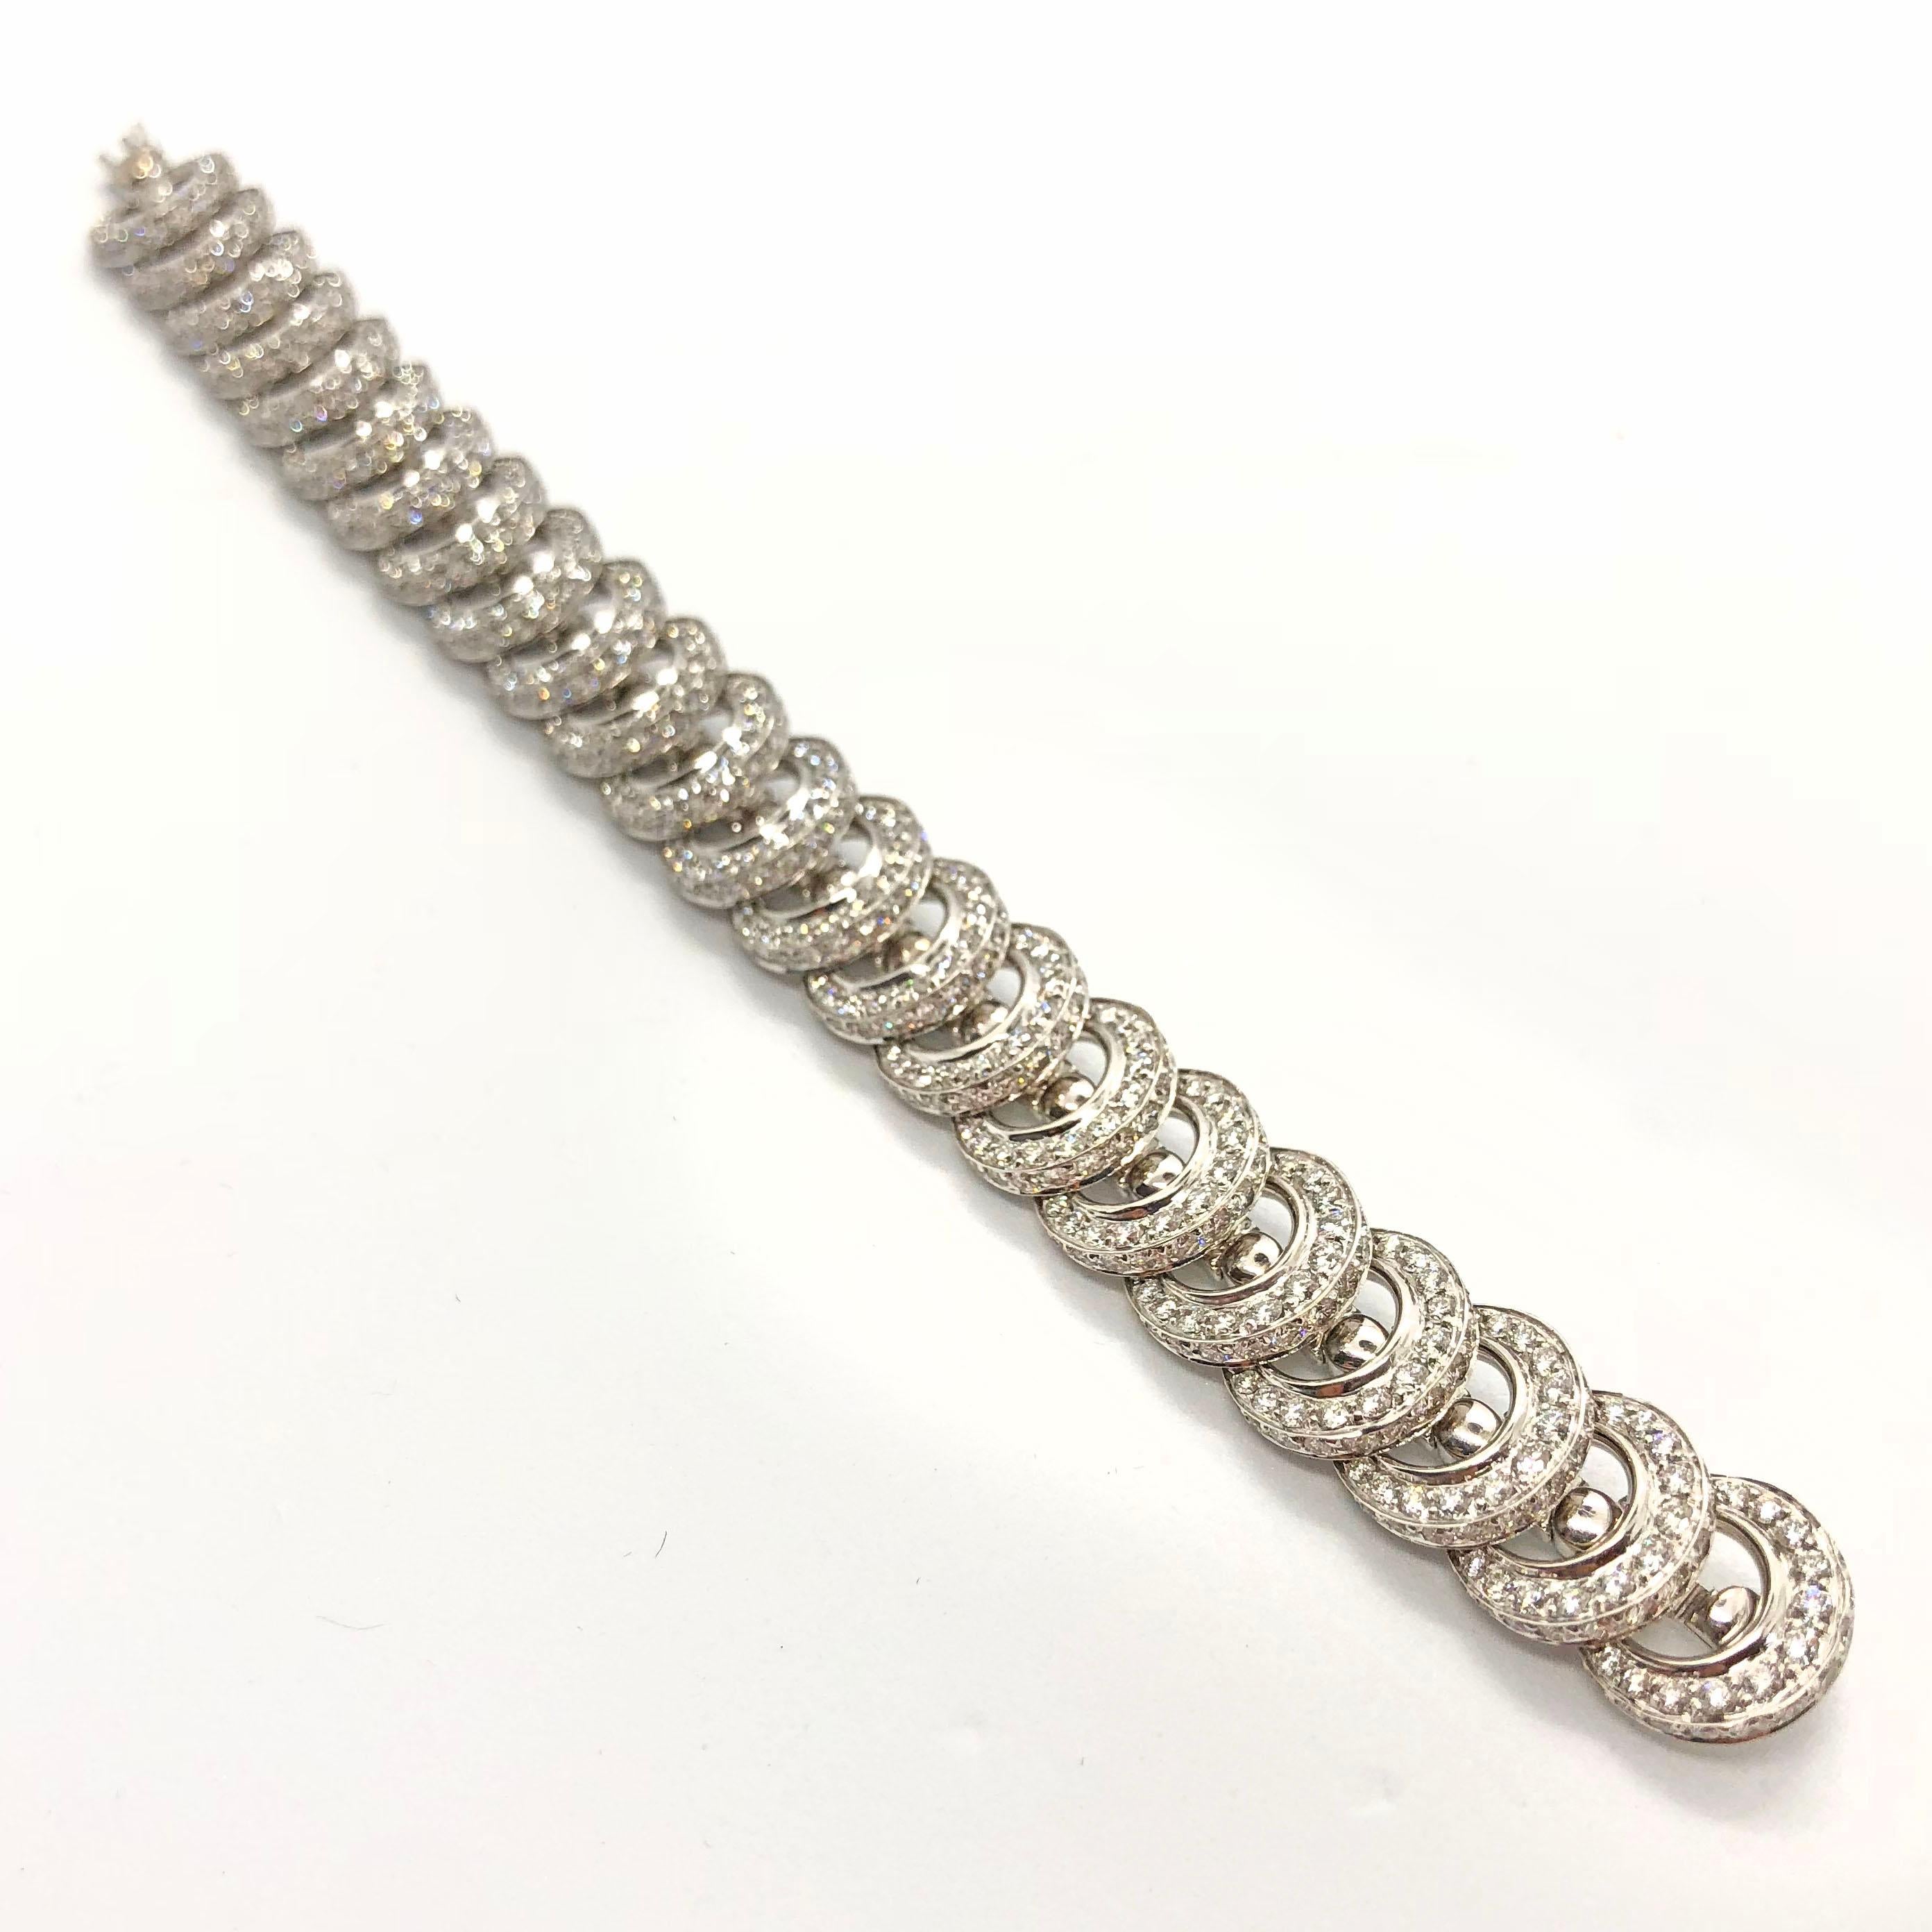 A beautiful diamond bracelet by Cartier in 18k white gold. It is a lovely and playful bracelet, with very fine quality diamonds, ca. 10 carats. Each circle has a fan like motion with diamonds on one side and white gold on the other. The bracelet was